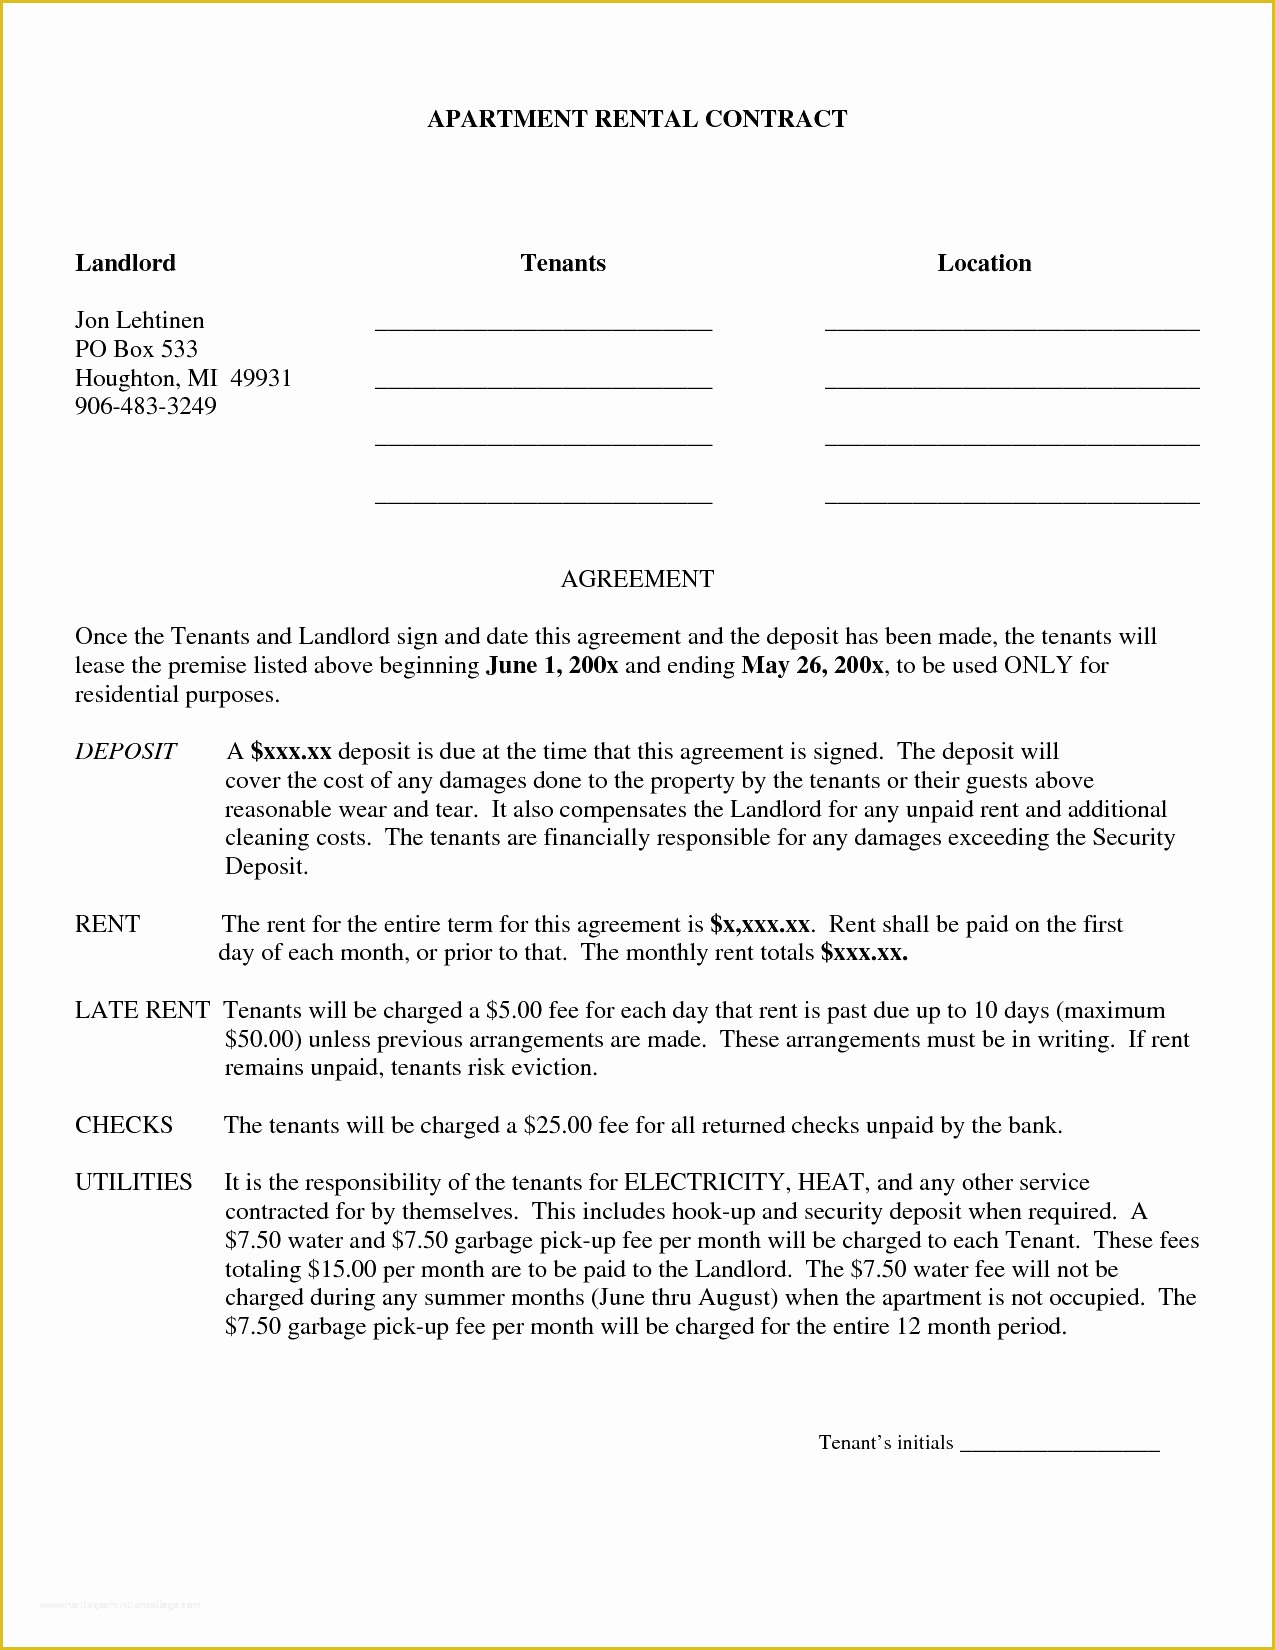 Free Apartment Lease Agreement Template Of Rental Contract Template Word Portablegasgrillweber